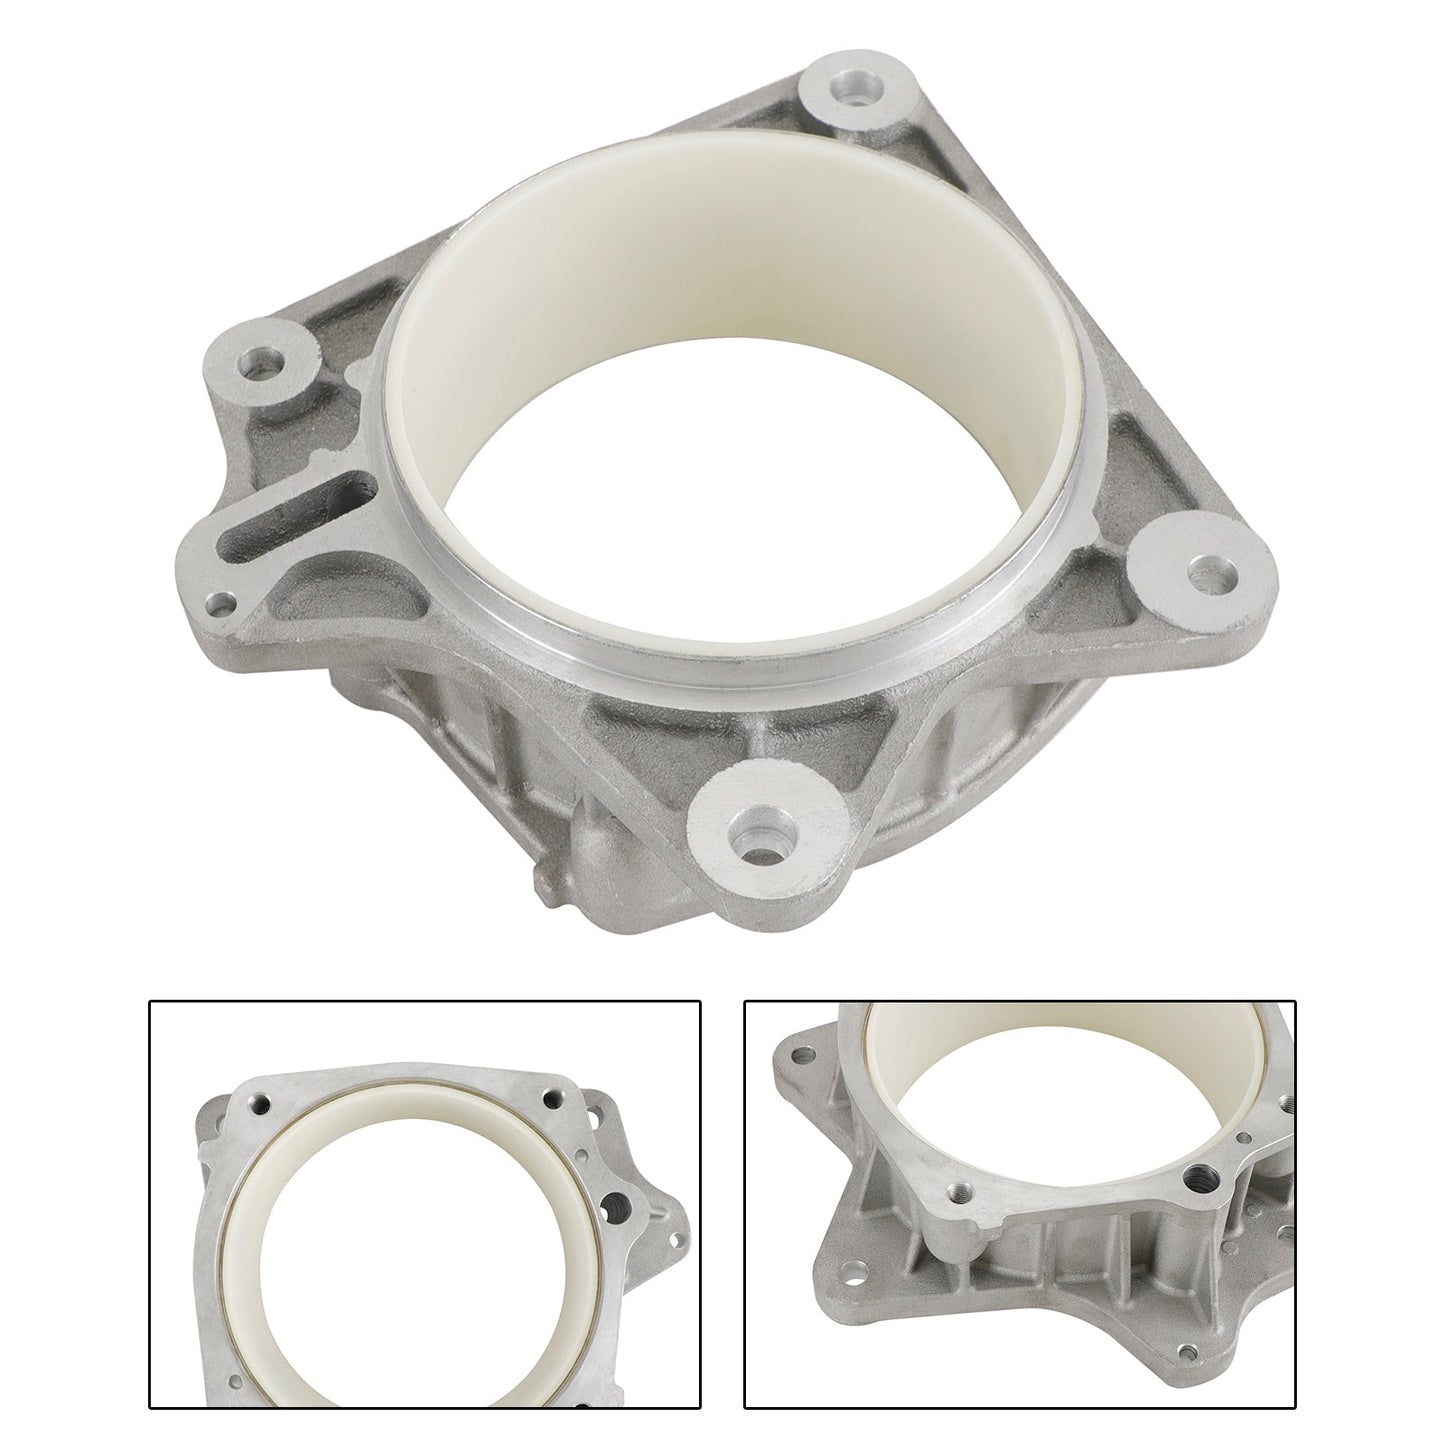 WEAR RING IMPELLER PUMP HOUSING fit for YAMAHA GP GPR 1200 1300 1200R 1300R